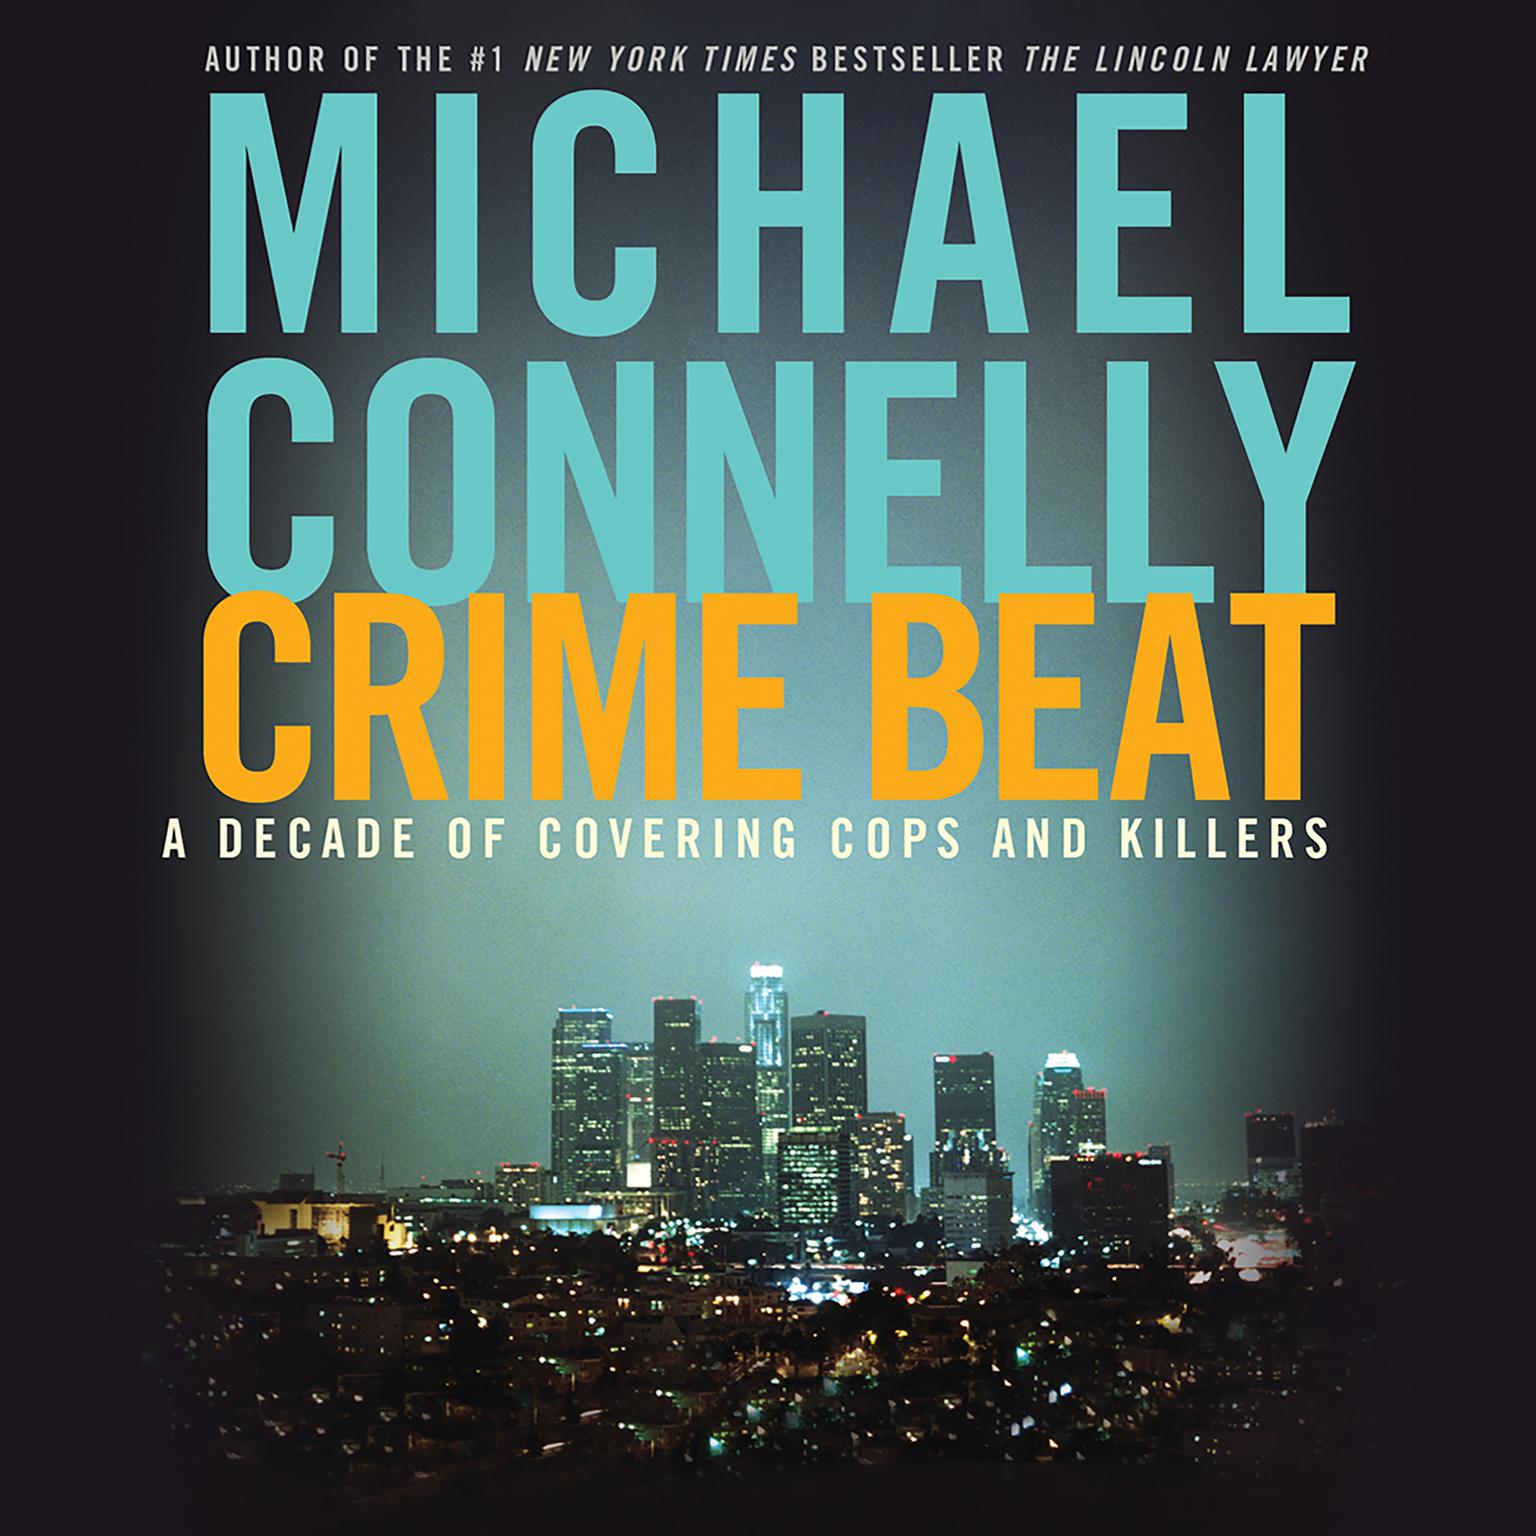 Crime Beat (Abridged): A Decade of Covering Cops and Killers Audiobook, by Michael Connelly